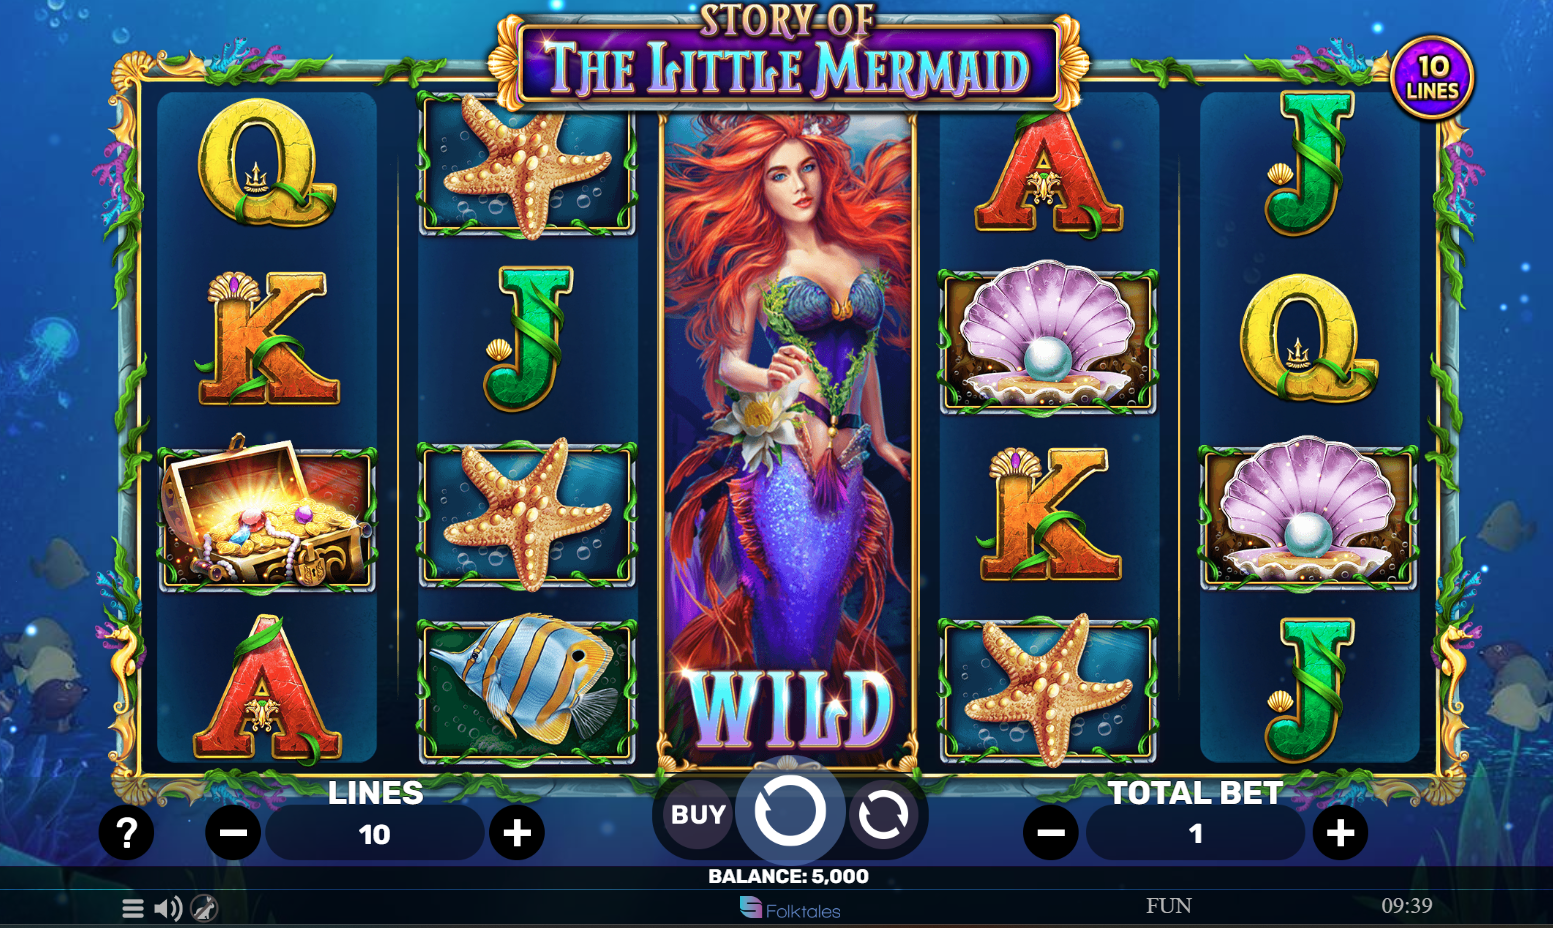 spinomenal-makes-a-splash-with-story-of-the-little-mermaid-release